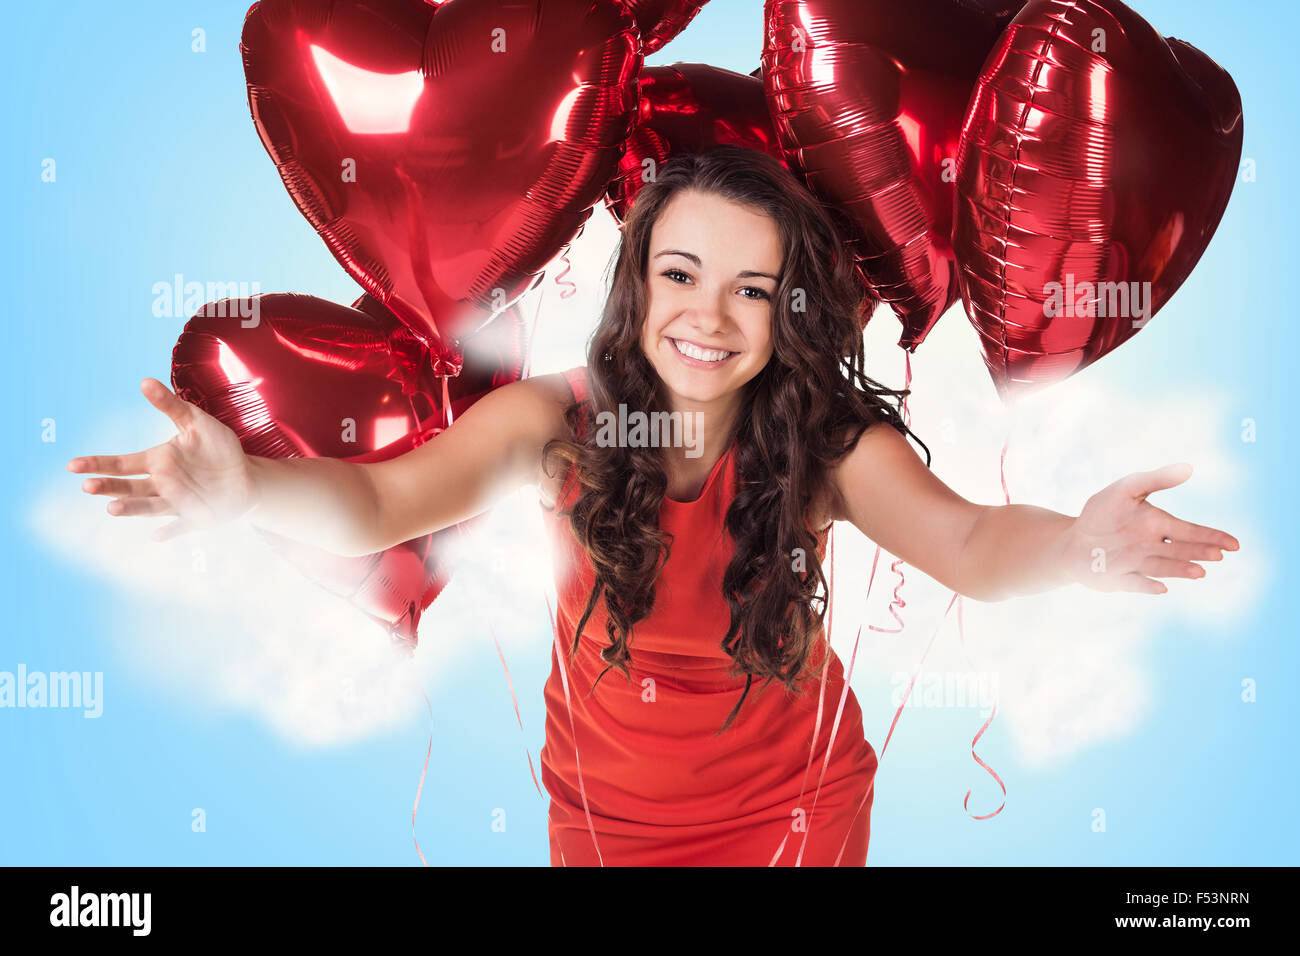 Young woman in red dress with balloons Stock Photo